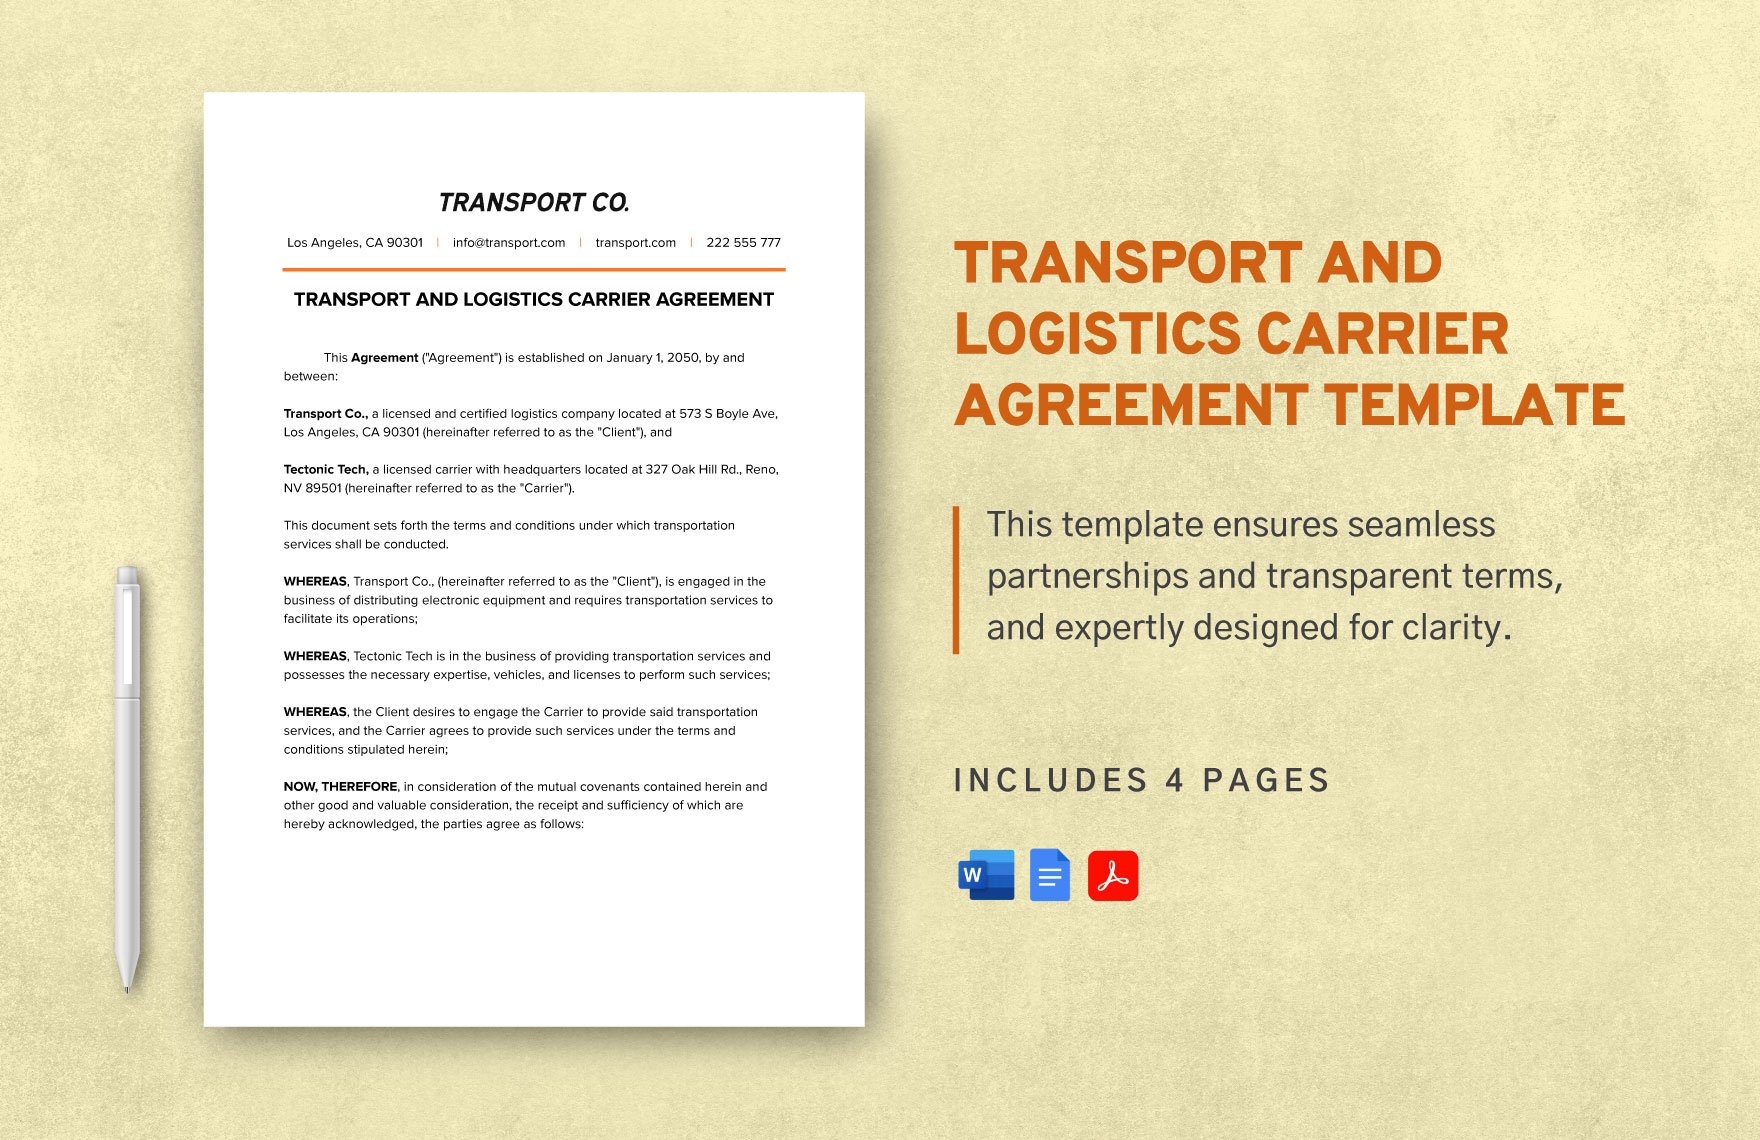 Transport and Logistics Carrier Agreement Template